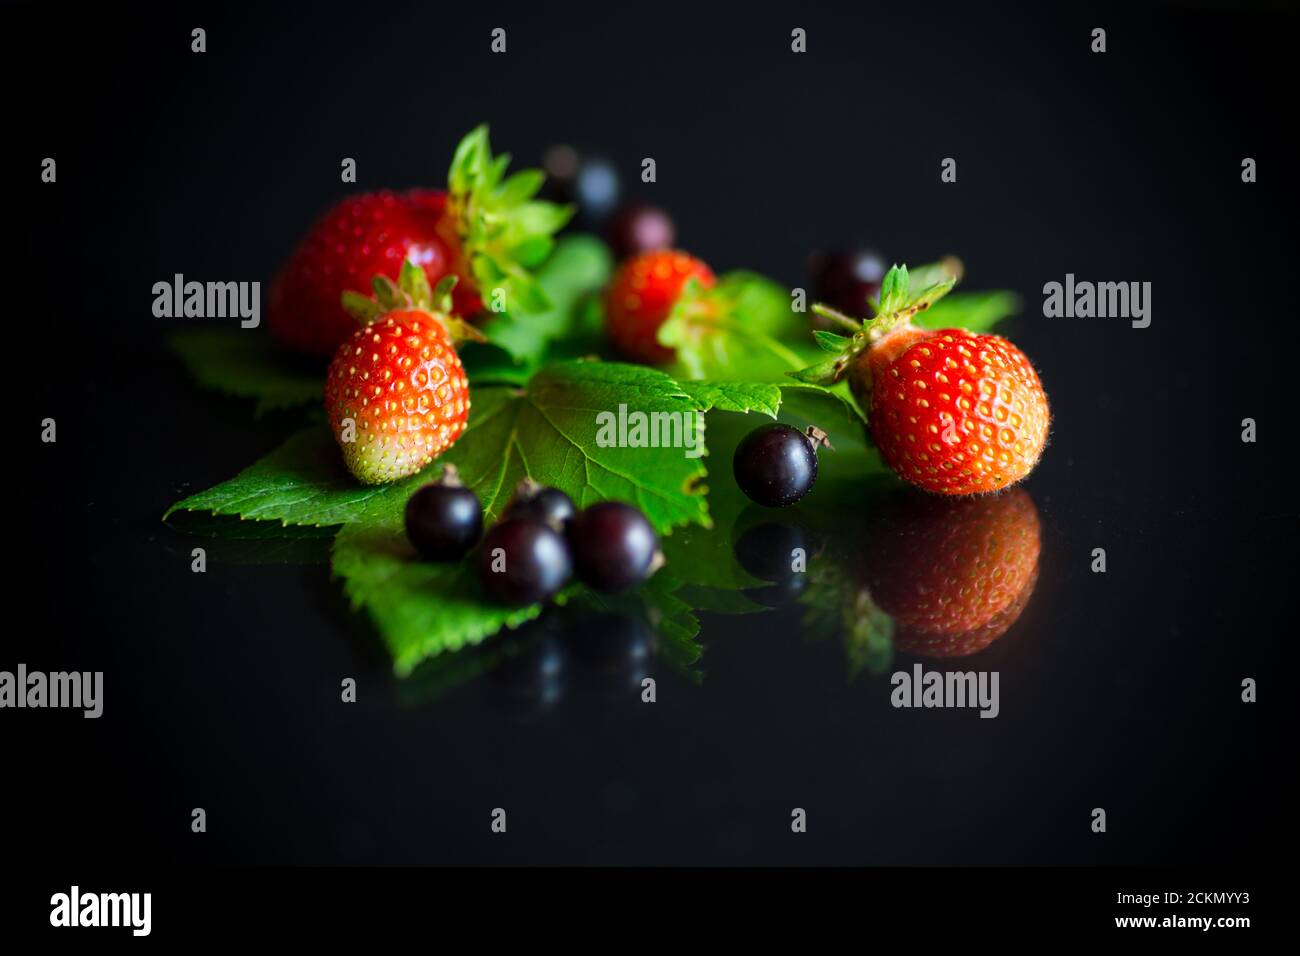 ripe red strawberries and berries of black currant Stock Photo